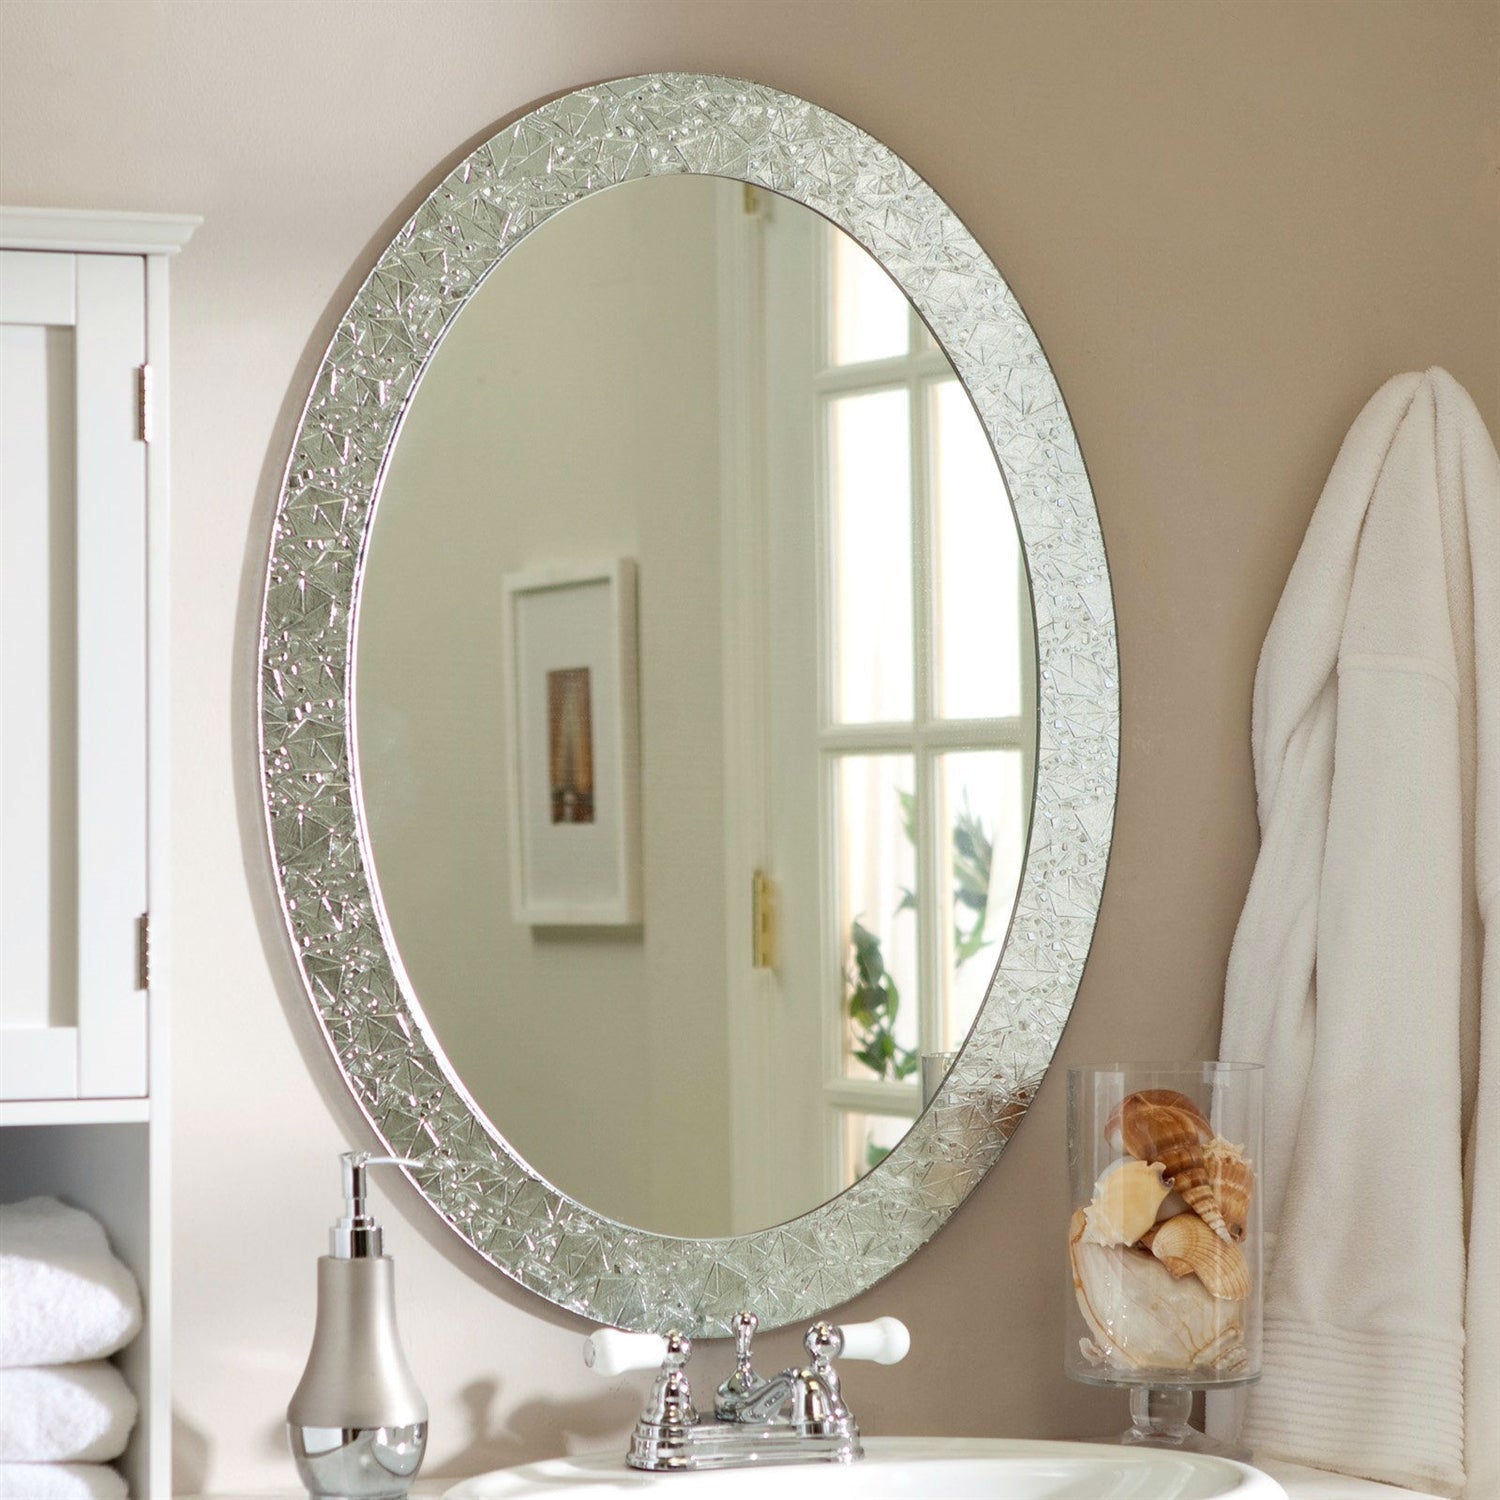 Accents > Mirrors - Oval Frame-less Bathroom Vanity Wall Mirror With Elegant Crystal Look Border